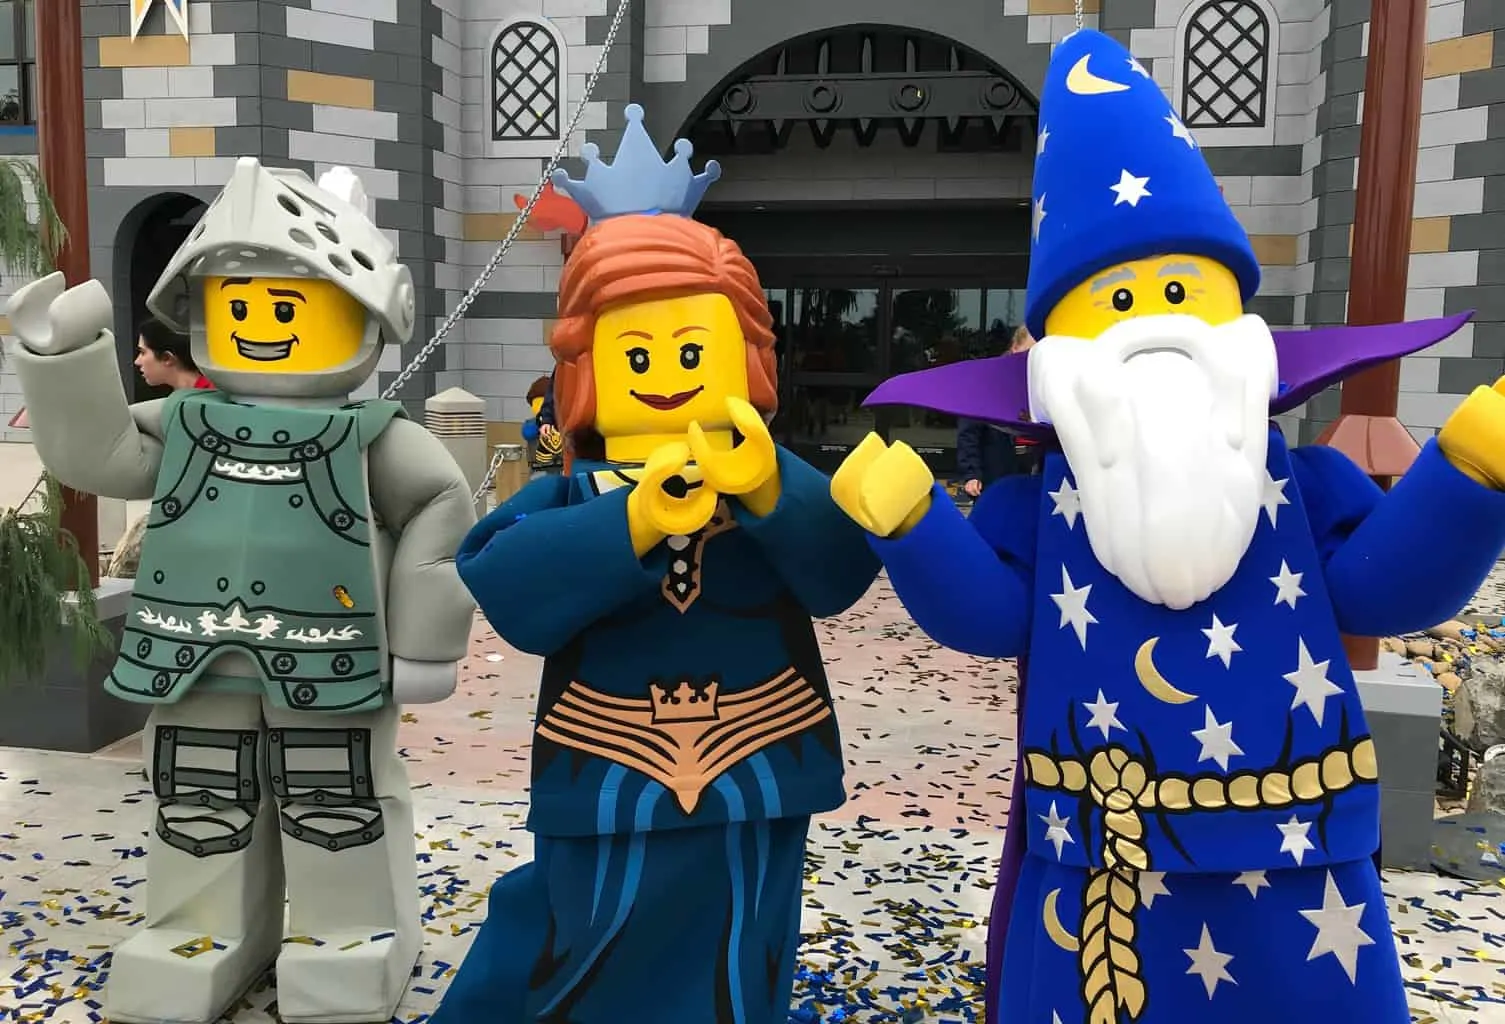 Merlin wizard standing in front of the LEGOLAND Castle Hotel in California